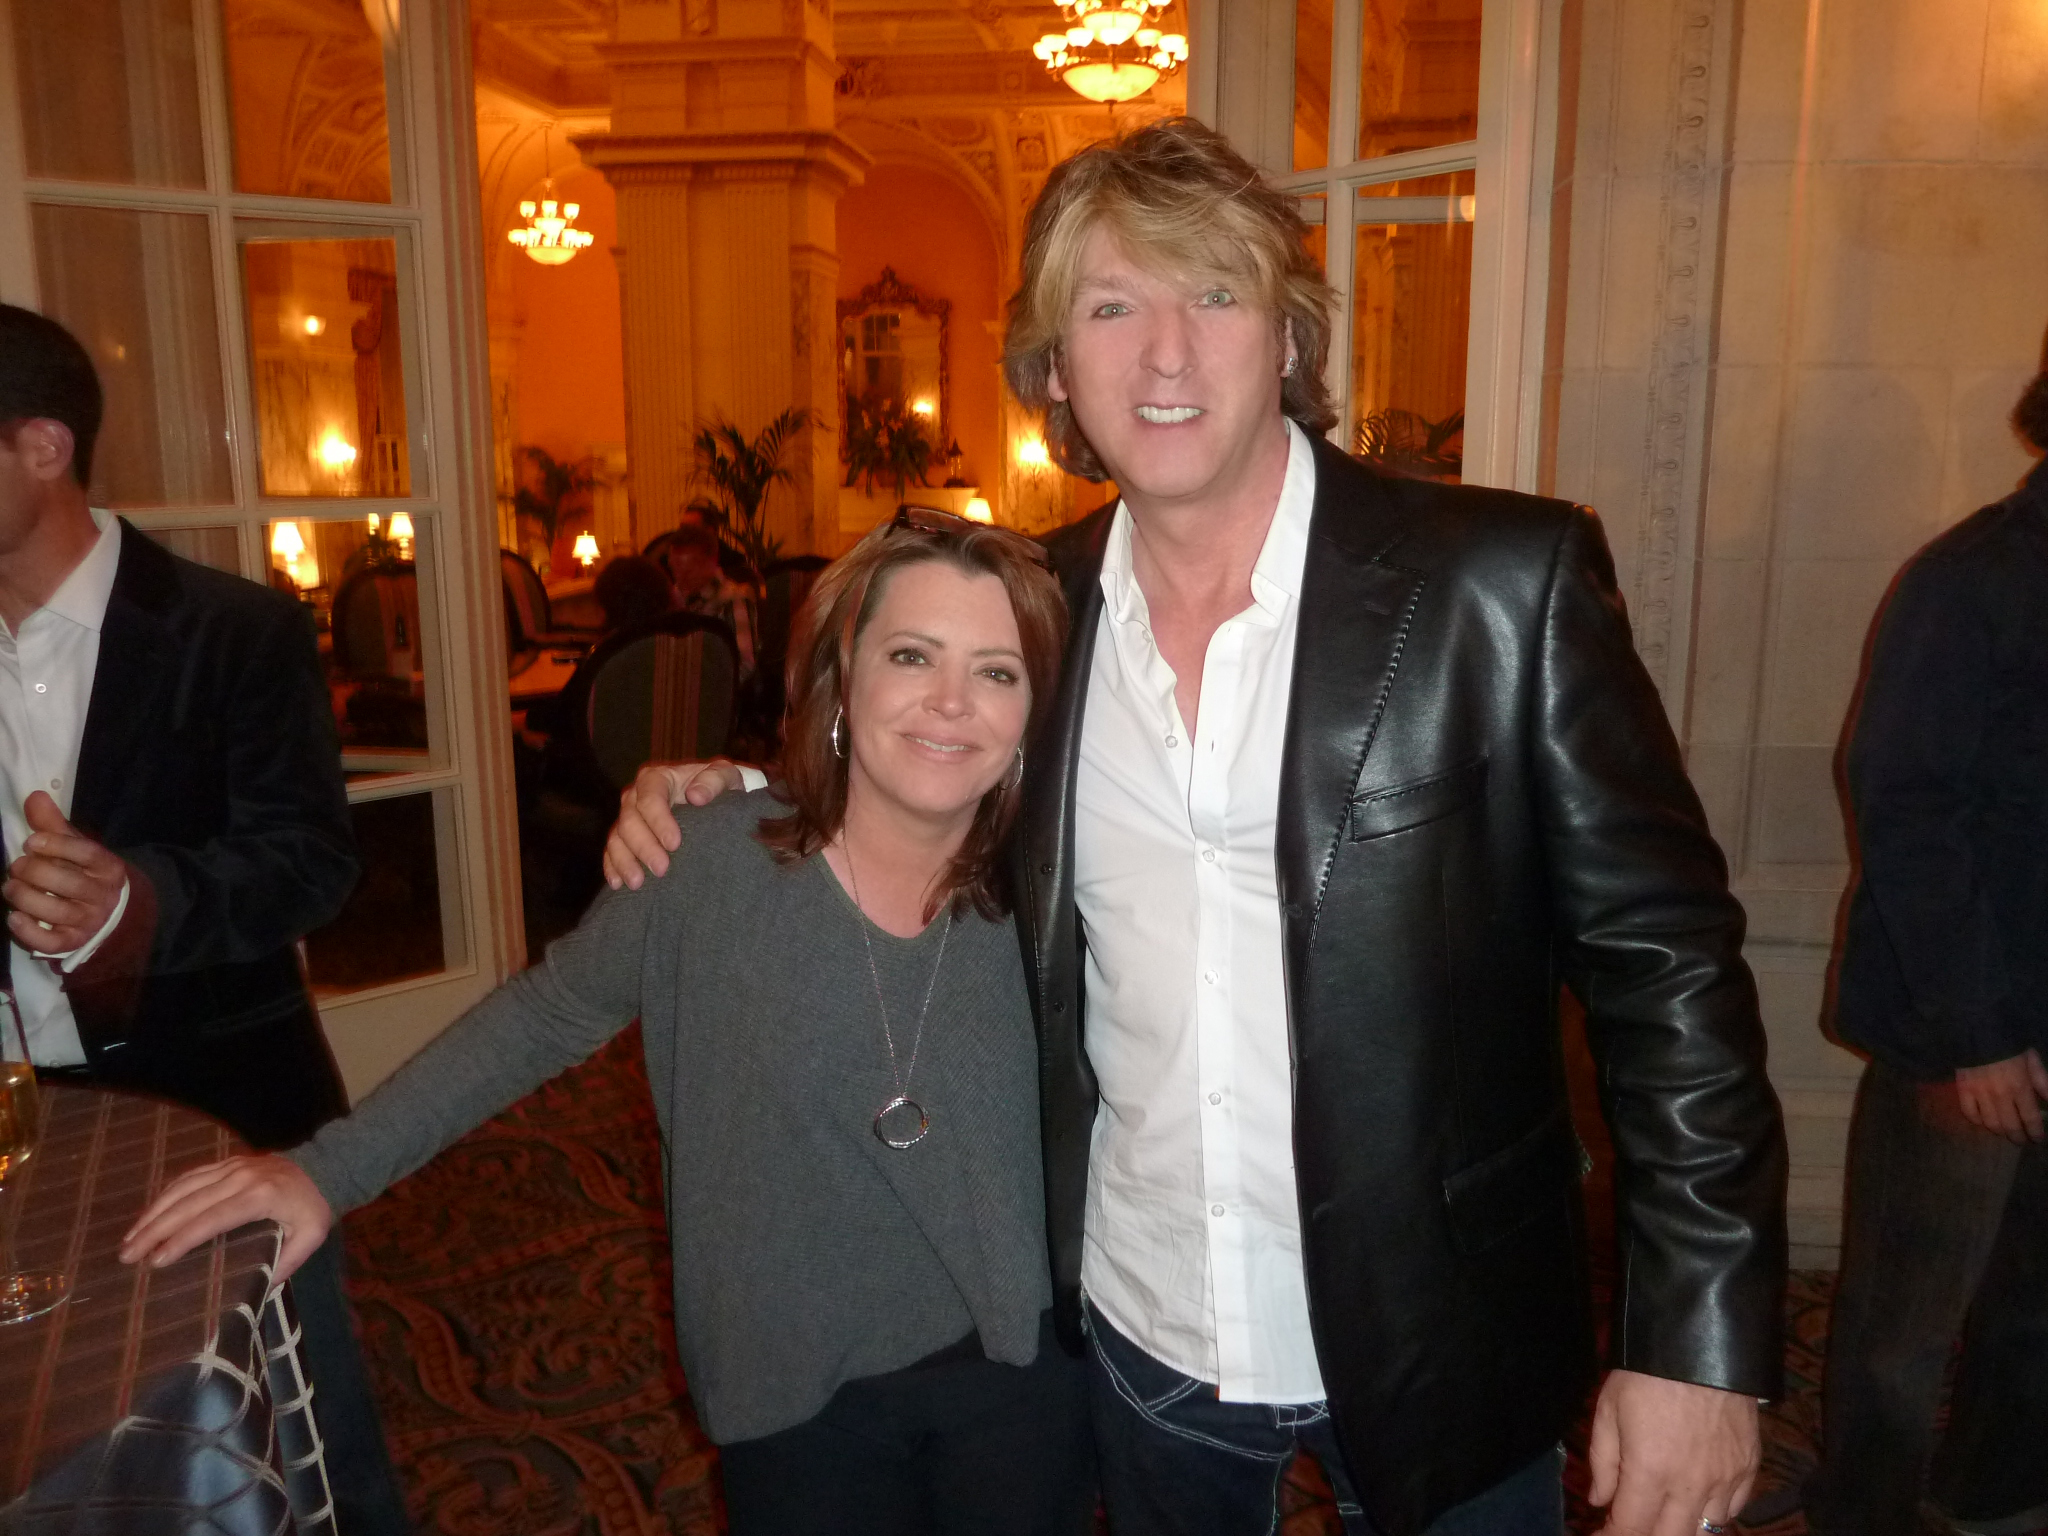 Kathleen Madigan and Michael Blakey at the Ron White After Party in Nashville